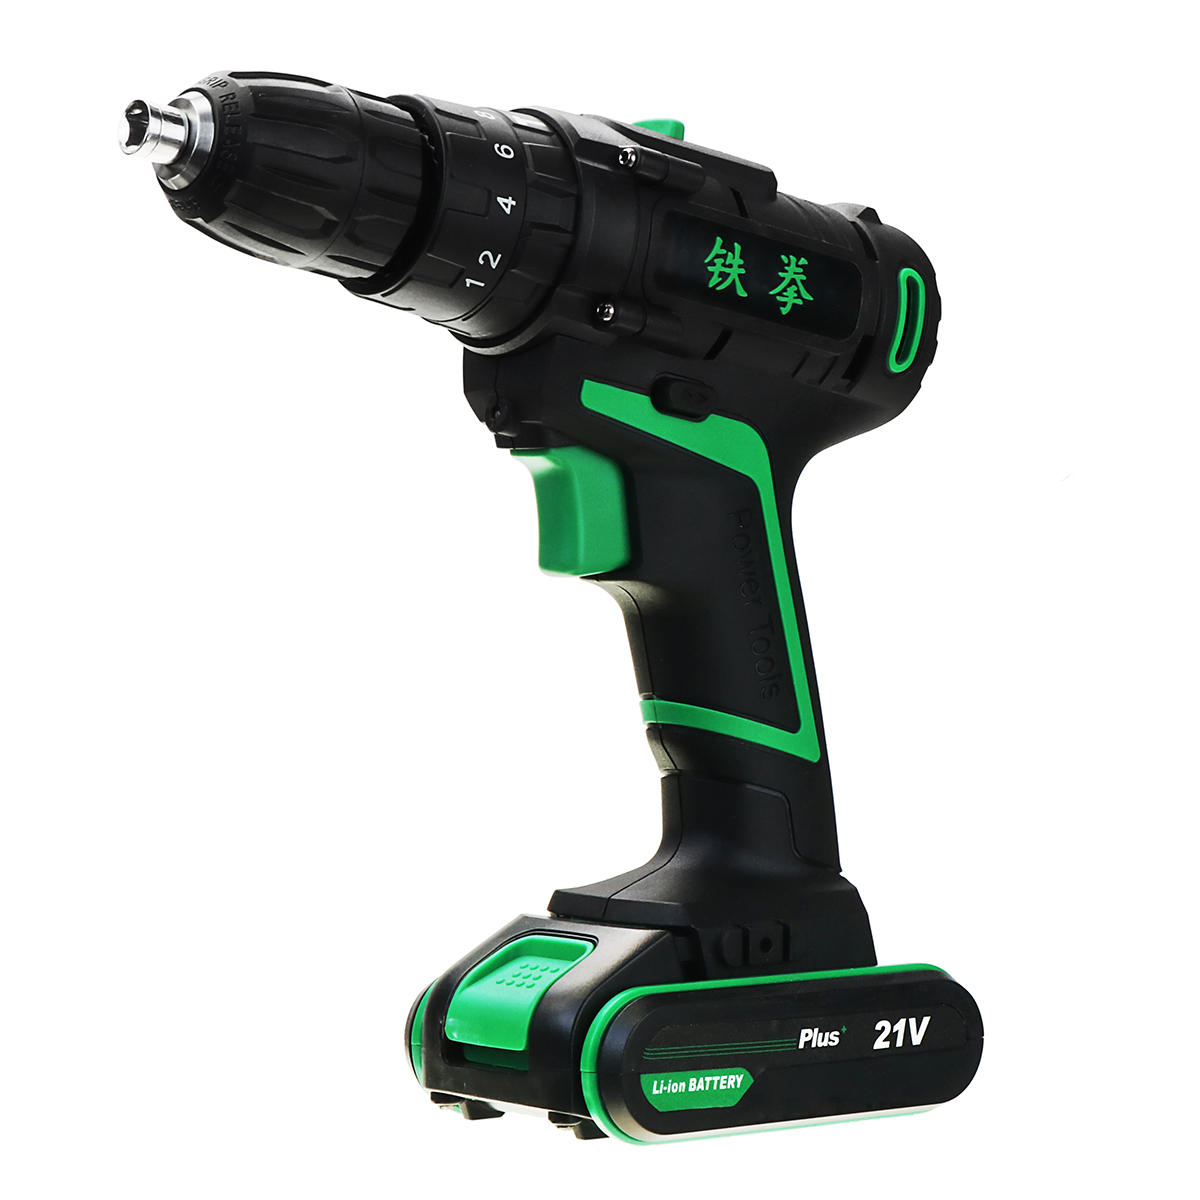 Image of 21V 1500mAh Li-ion Battery Cordless Electric Hammer Power Drill 2 Speed Power Screwdriver